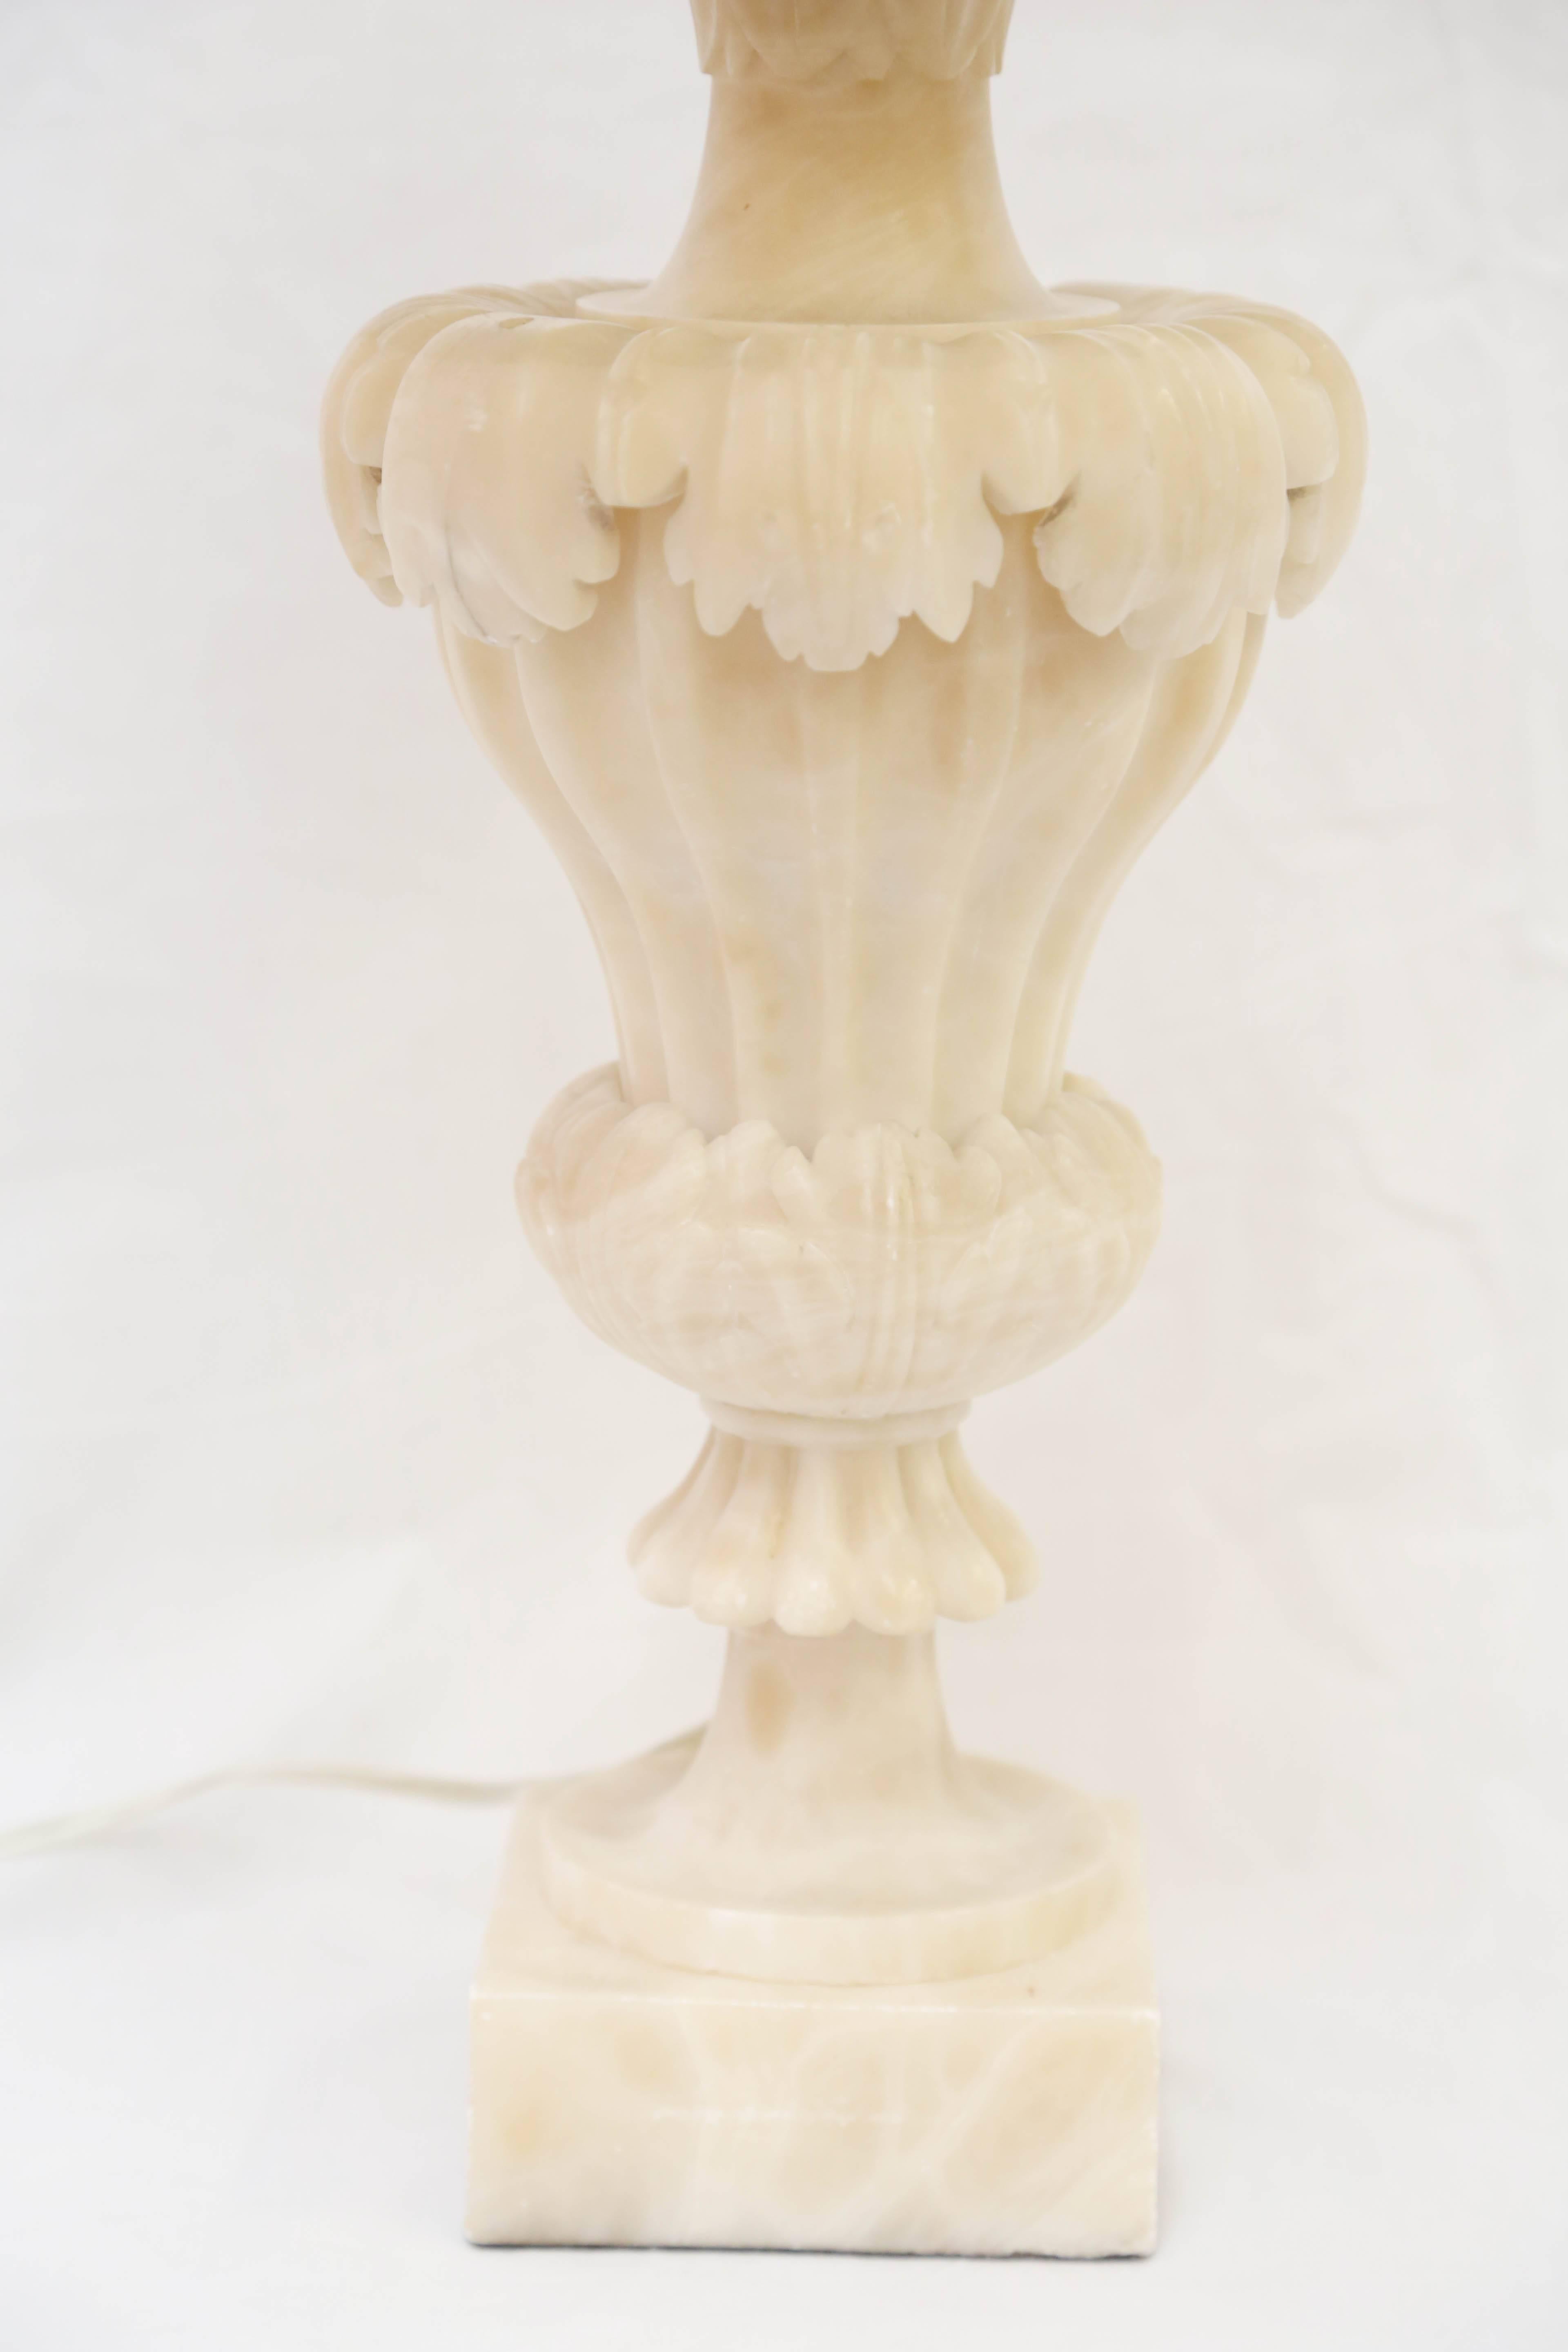 Each of vase form boldly carved with acanthus leaves on a plinth base. Measures: Height to socket: 21.5".